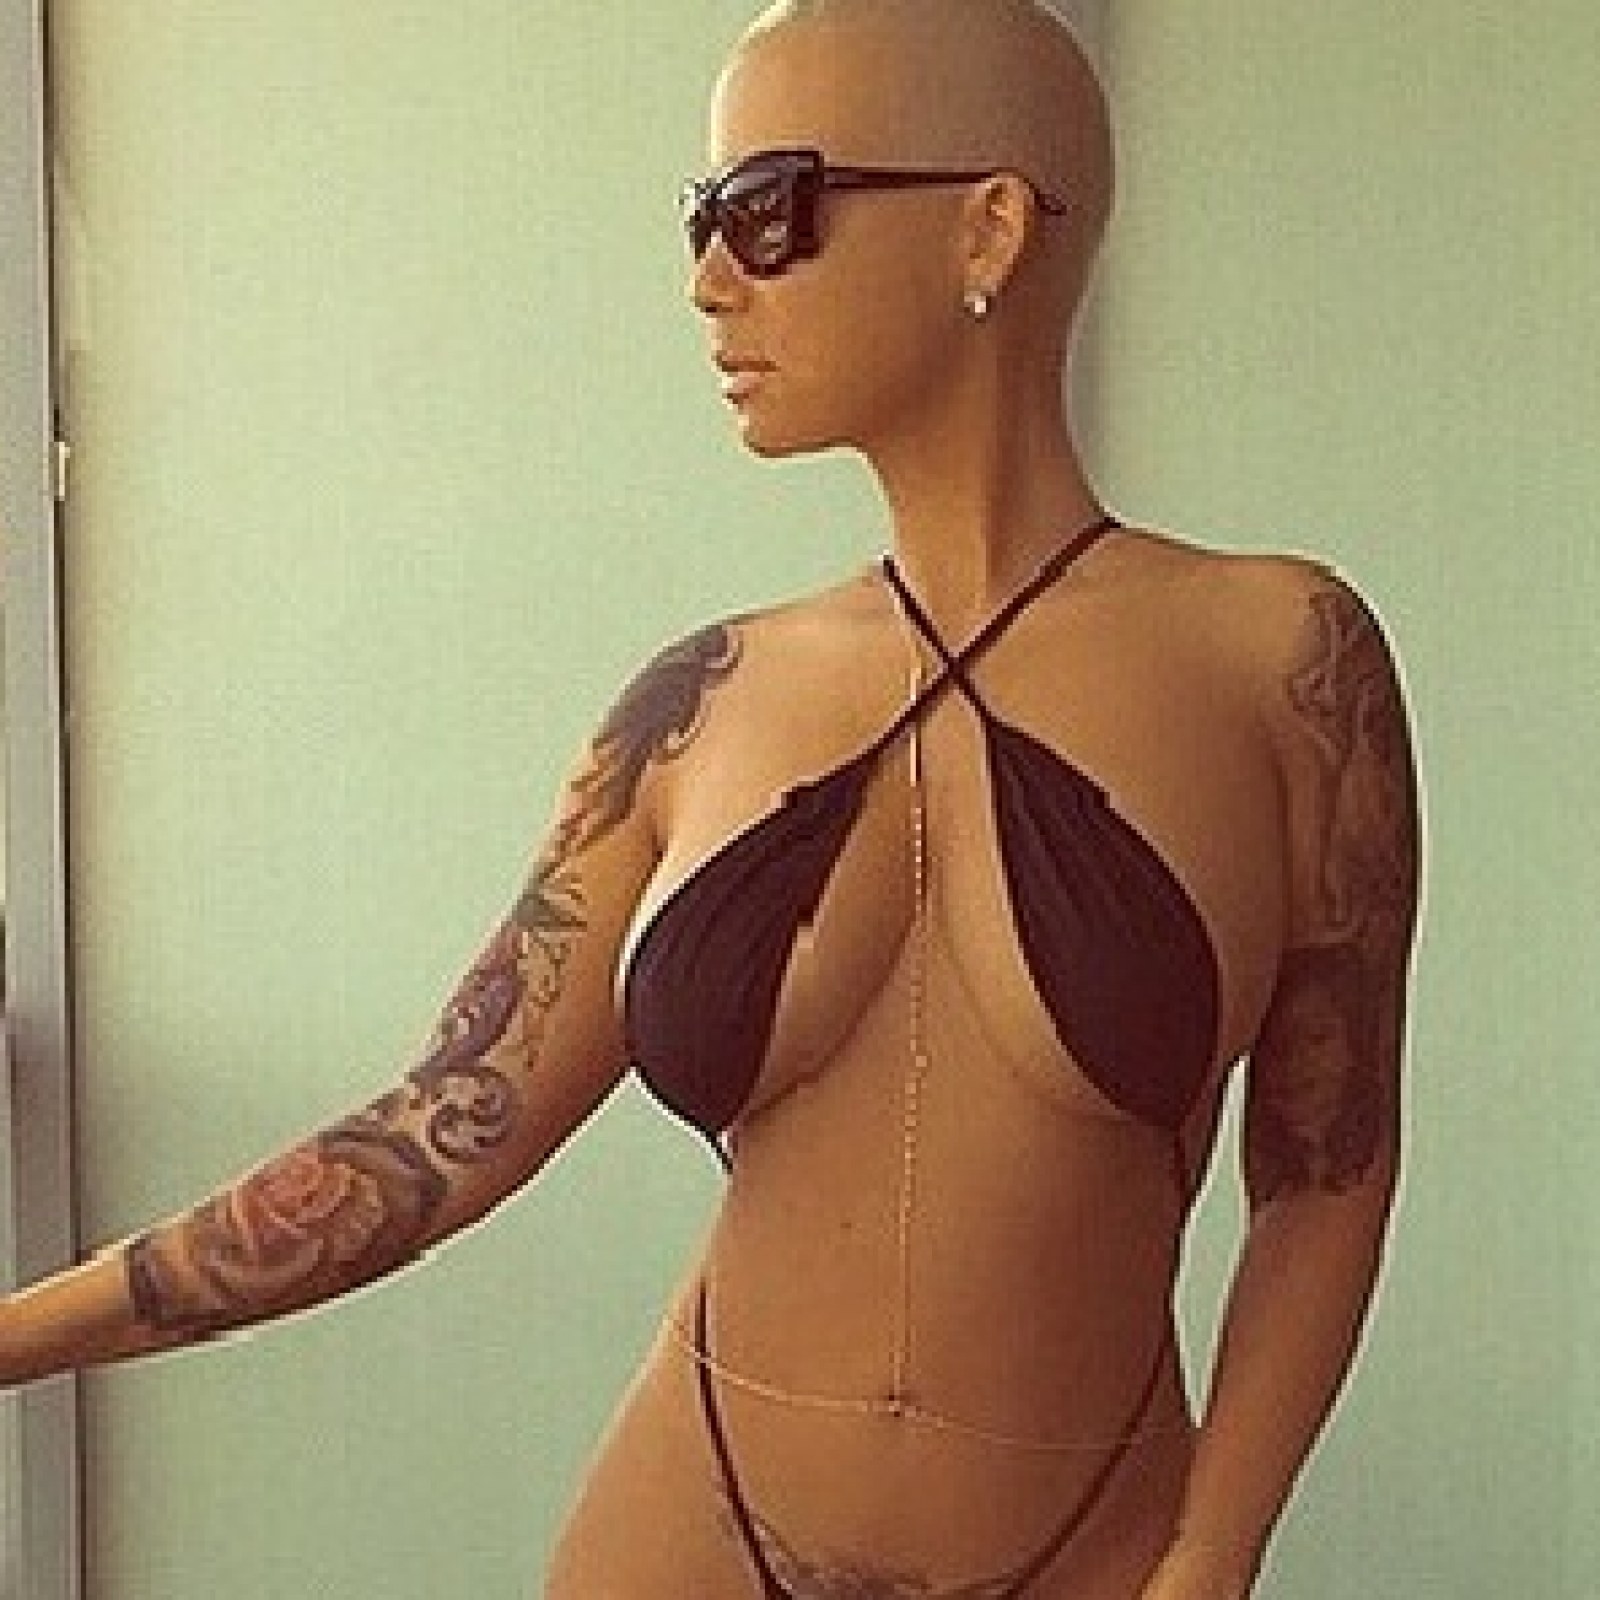 Amber Rose semi-nude Instagram photo to break the internet? Twitter users  give thumbs down to Wiz Khalifa's ex-wife